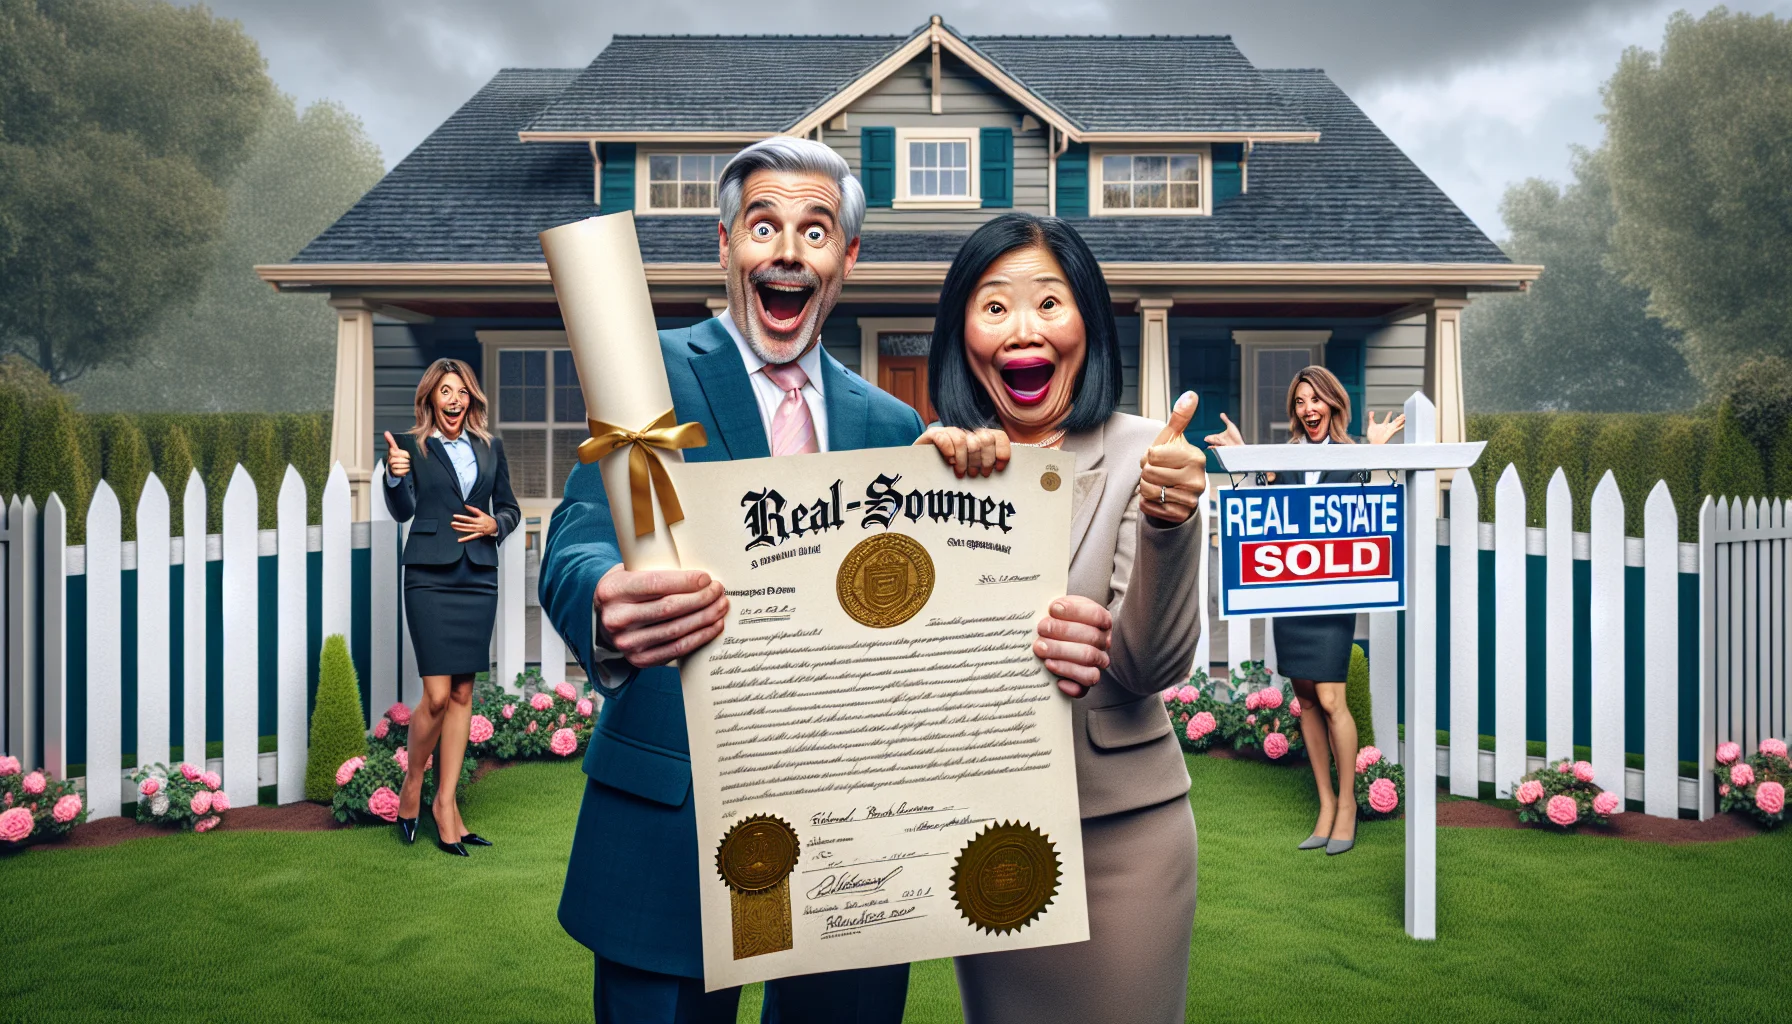 Create a humorous, hyper-realistic image that depicts an ideal scenario related to the REAL-ESTATE domain. In this image, visualize a middle-aged Caucasian male and a young Asian female, both displaying ecstatic, overly exaggerated expressions as they stand in front of their newly procured home – a charming, suburban two-story house with rose bushes and a picket fence. In their hands, they are waving a large, formally decorated parchment that signifies their 'First Home Owner Grant'. A sold sign appears on the lawn, and a real estate agent, a Black woman in her late 30s, is giving them a thumbs-up from the distance.